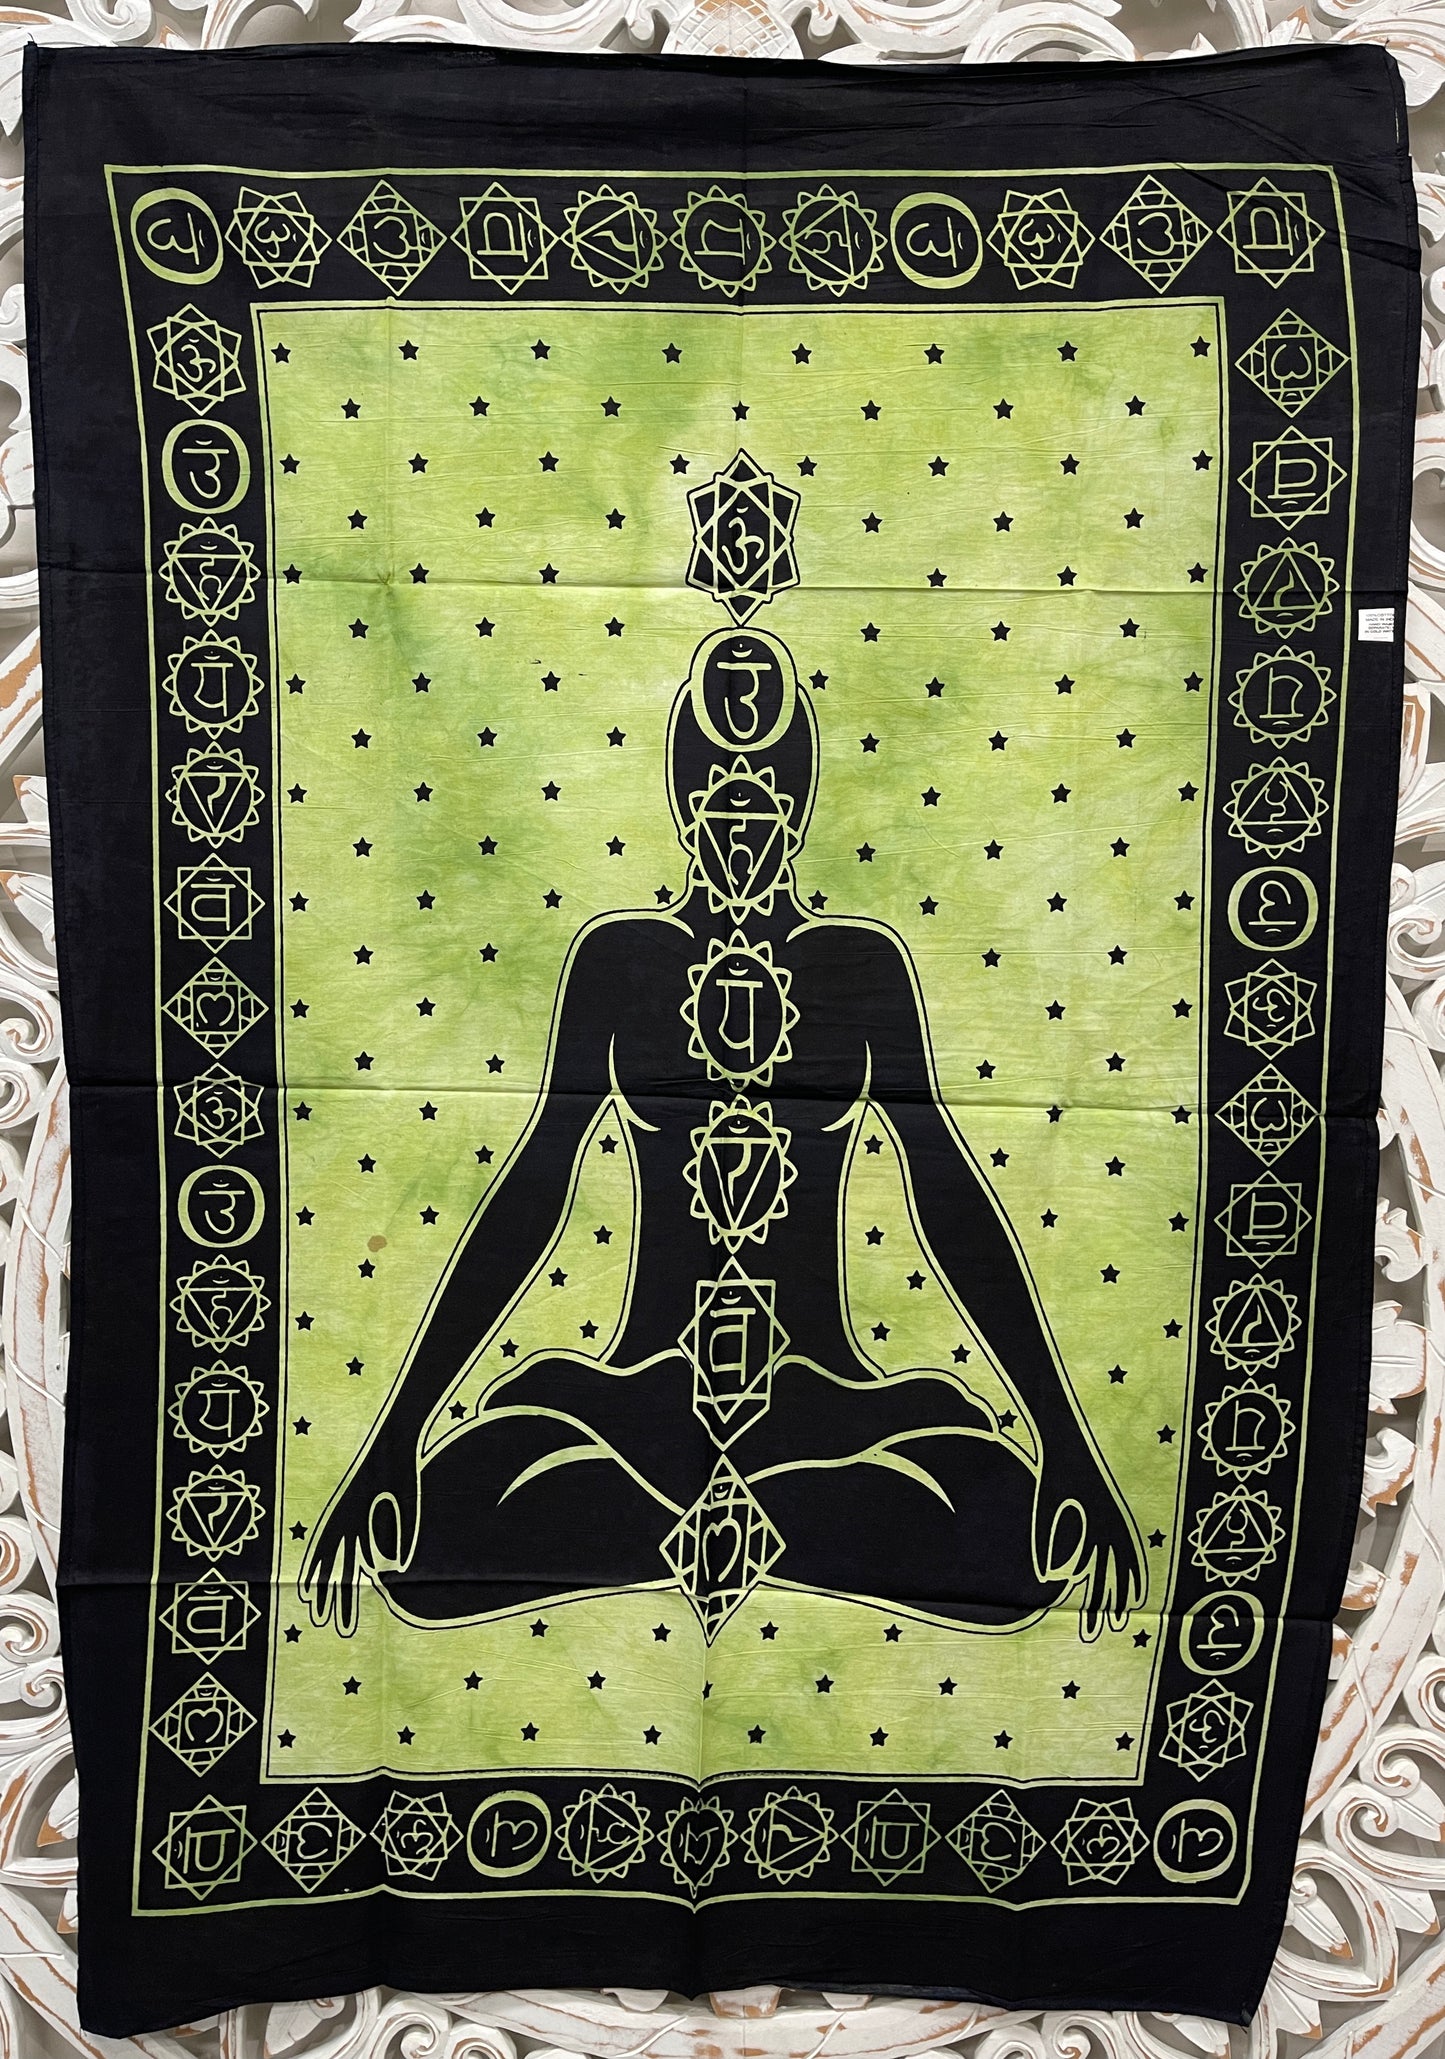 Hand printed Fabric Posters Mini Chakra Meditation Tapestries Wall Hanging - Available in 5 Colors